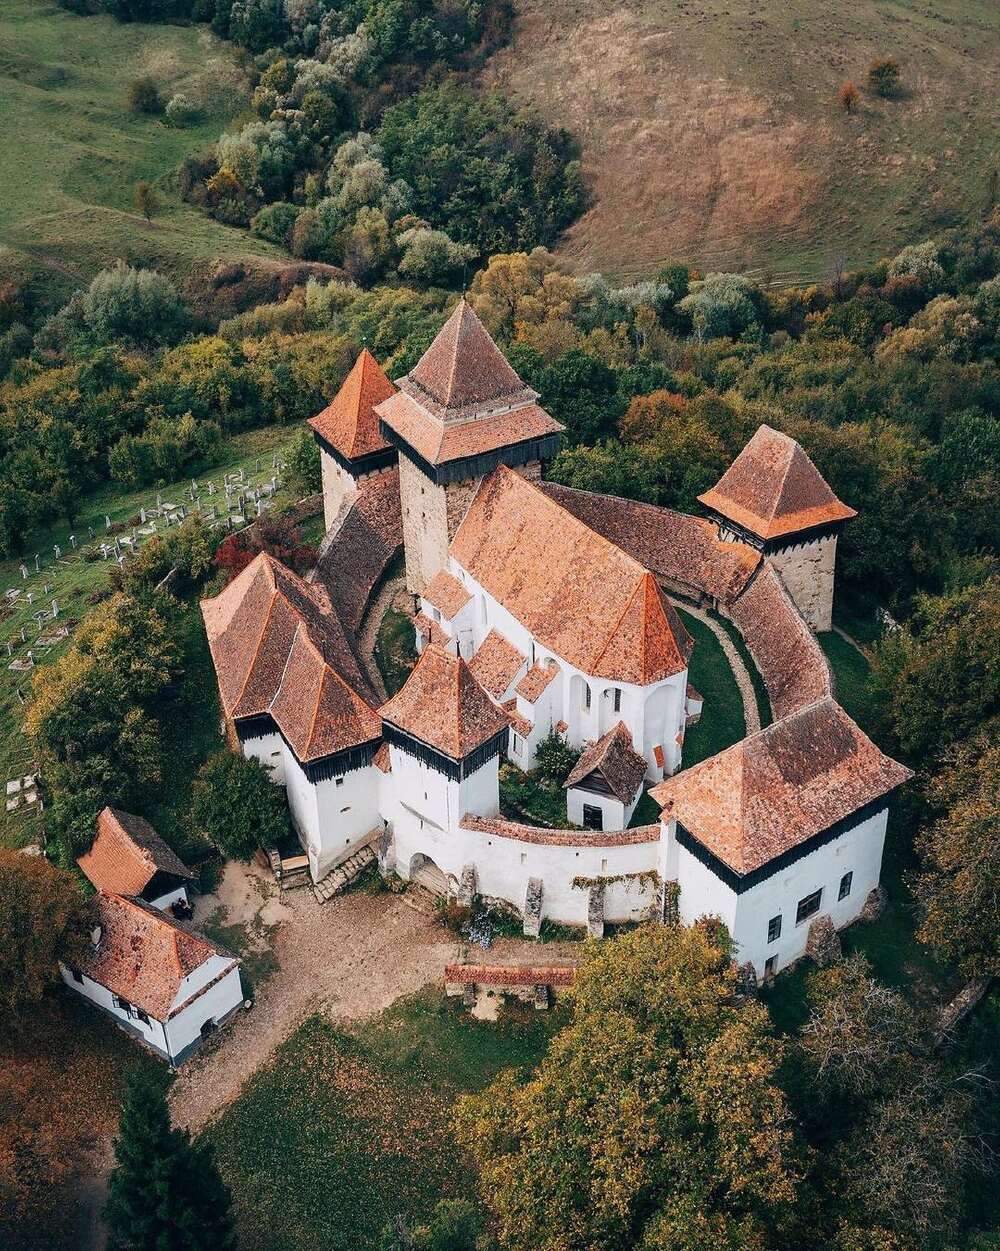 Best things to visit in Transylvania